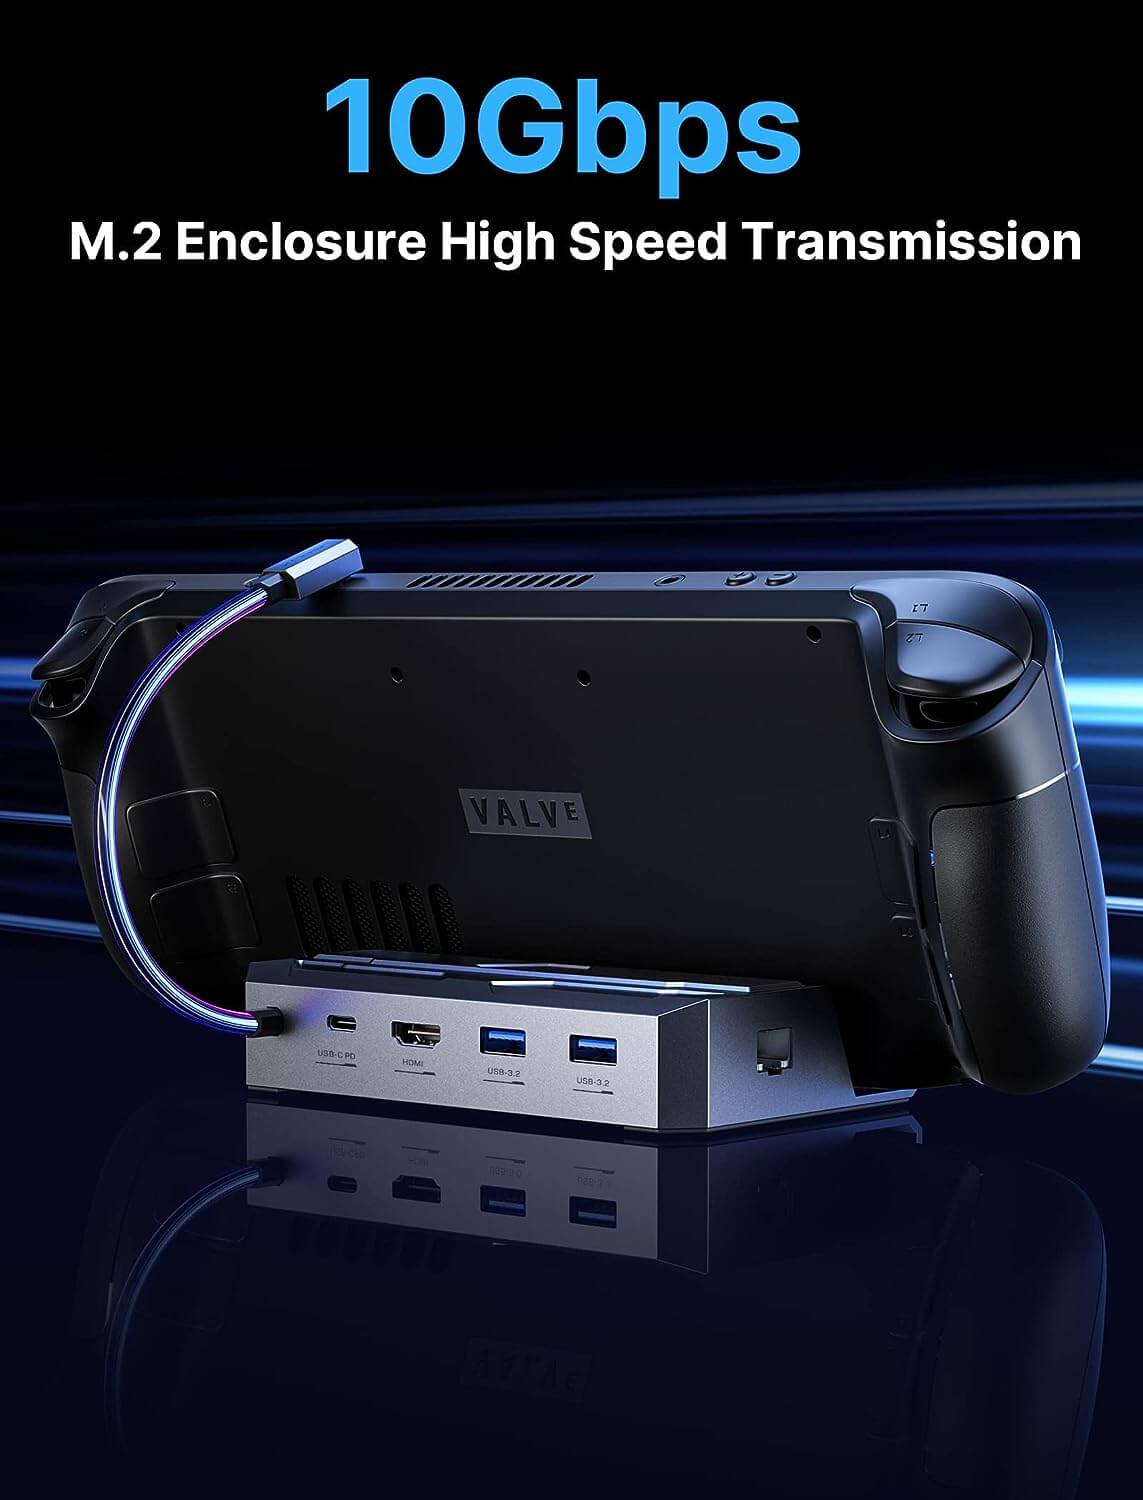 6-in-1 Docking Station with M.2 SSD Enclosure